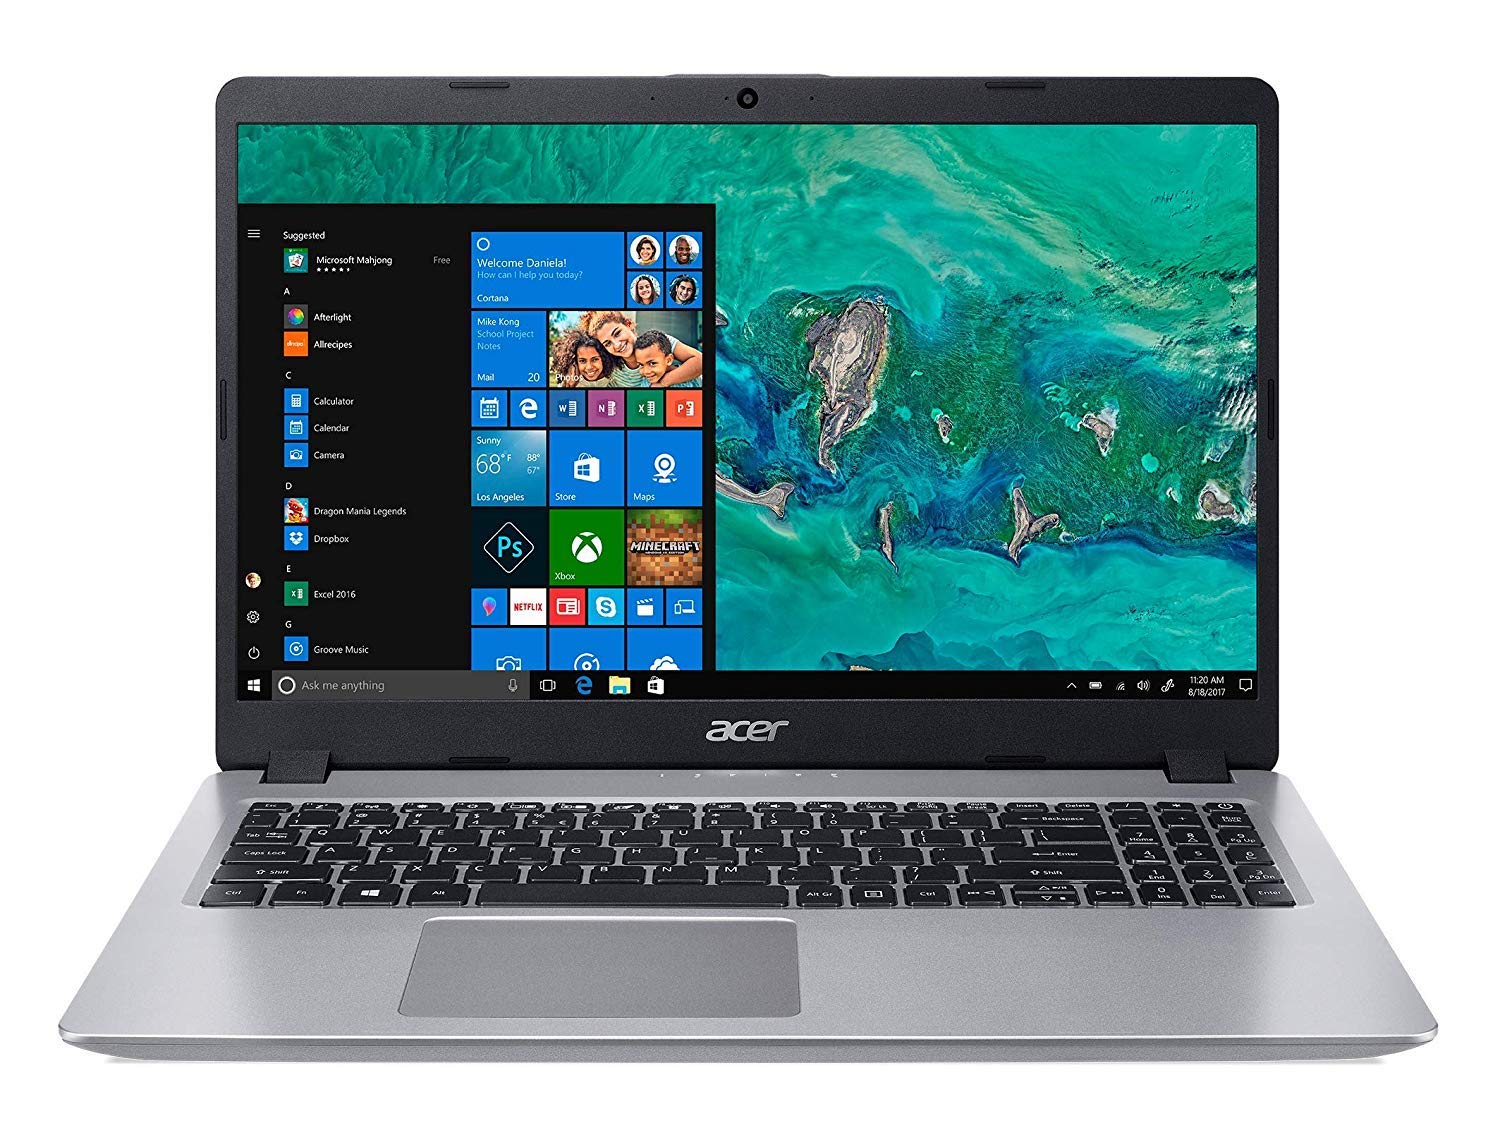 Acer Aspire 5 Slim Laptop - Guide to Finding the Best Laptop